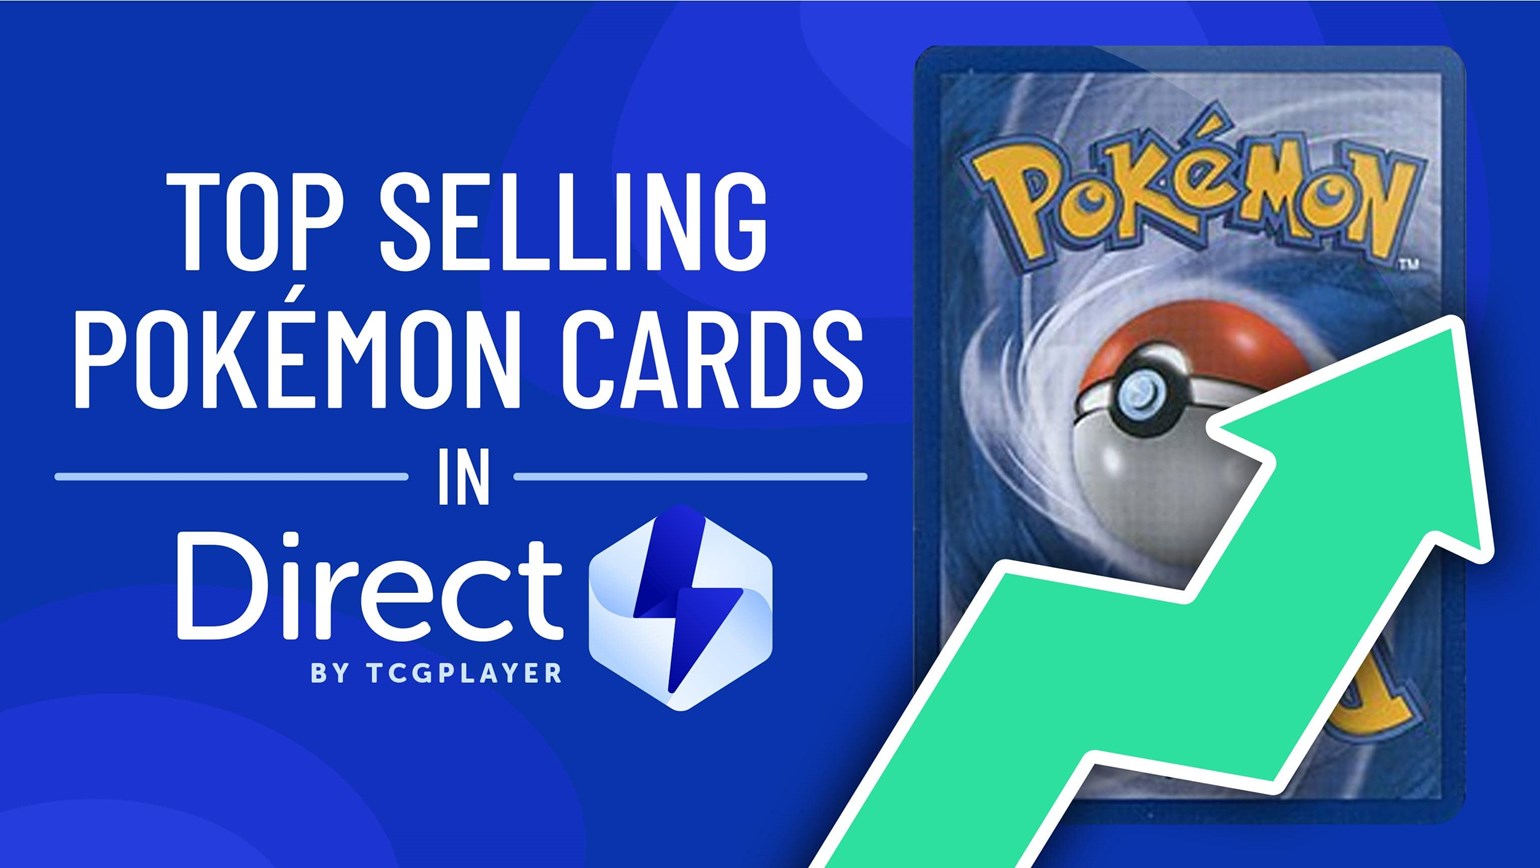 http://seller.tcgplayer.com/media/7876/top-selling-pkm-cards-in-direct.jpg?anchor=center&mode=crop&width=1540&height=868&rnd=133391058160000000